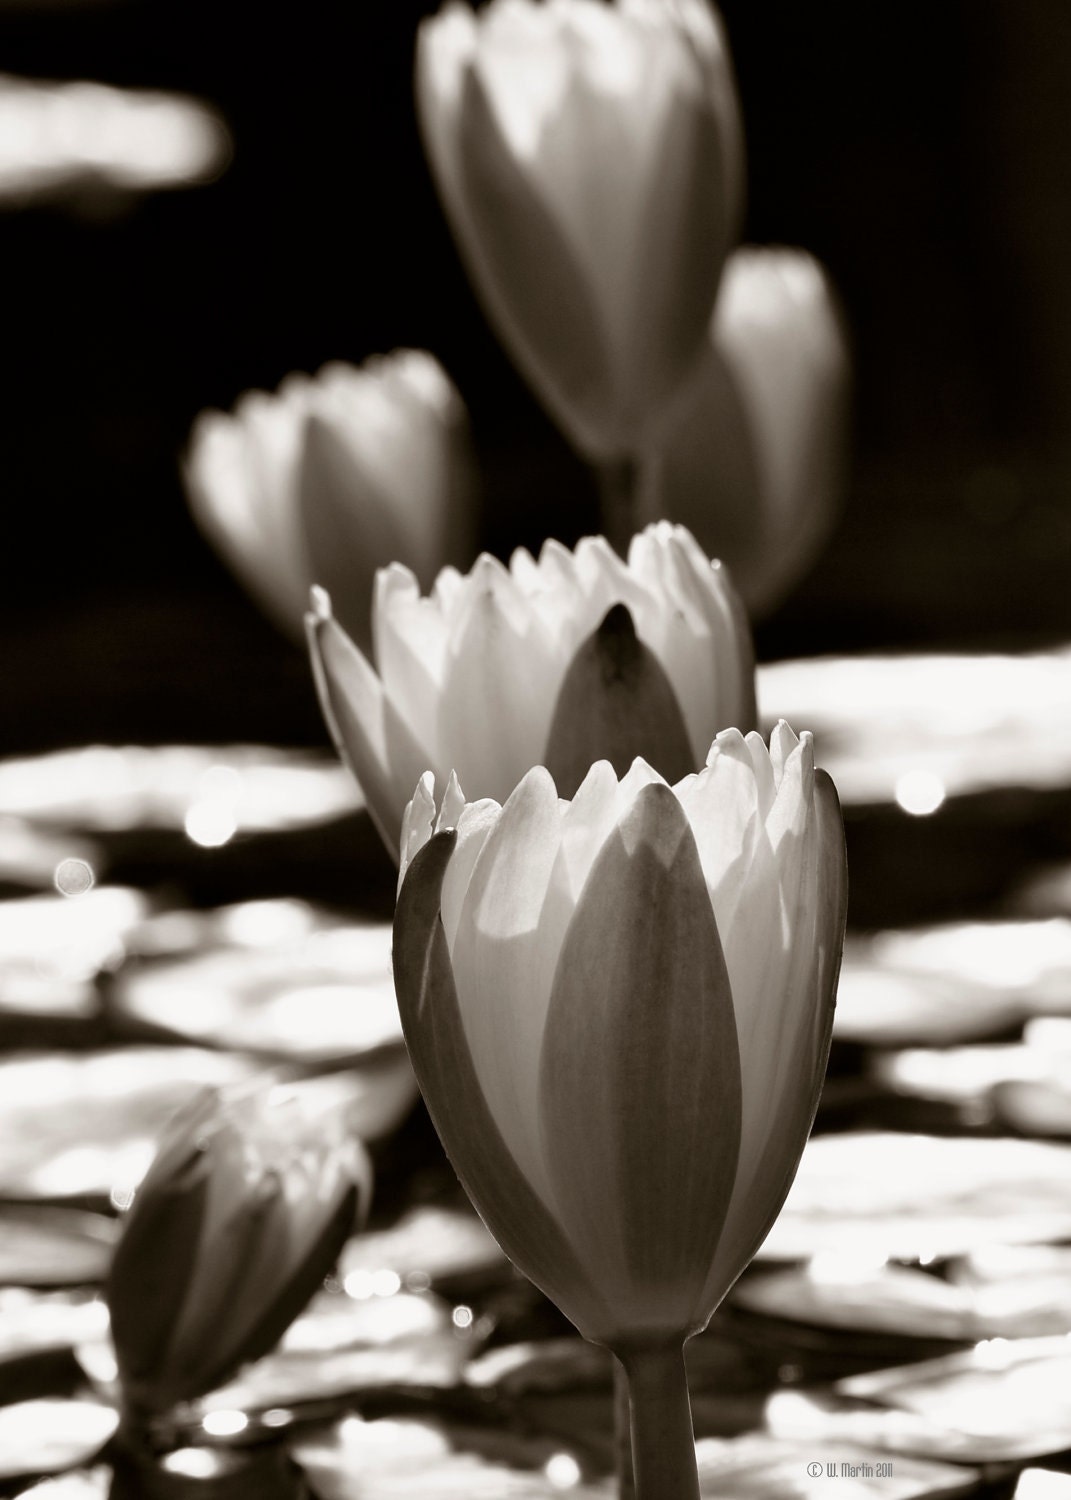 Water Lily's in the Sun - Black and White photography, photography, fine art photography, floral photography - WiMDesigns